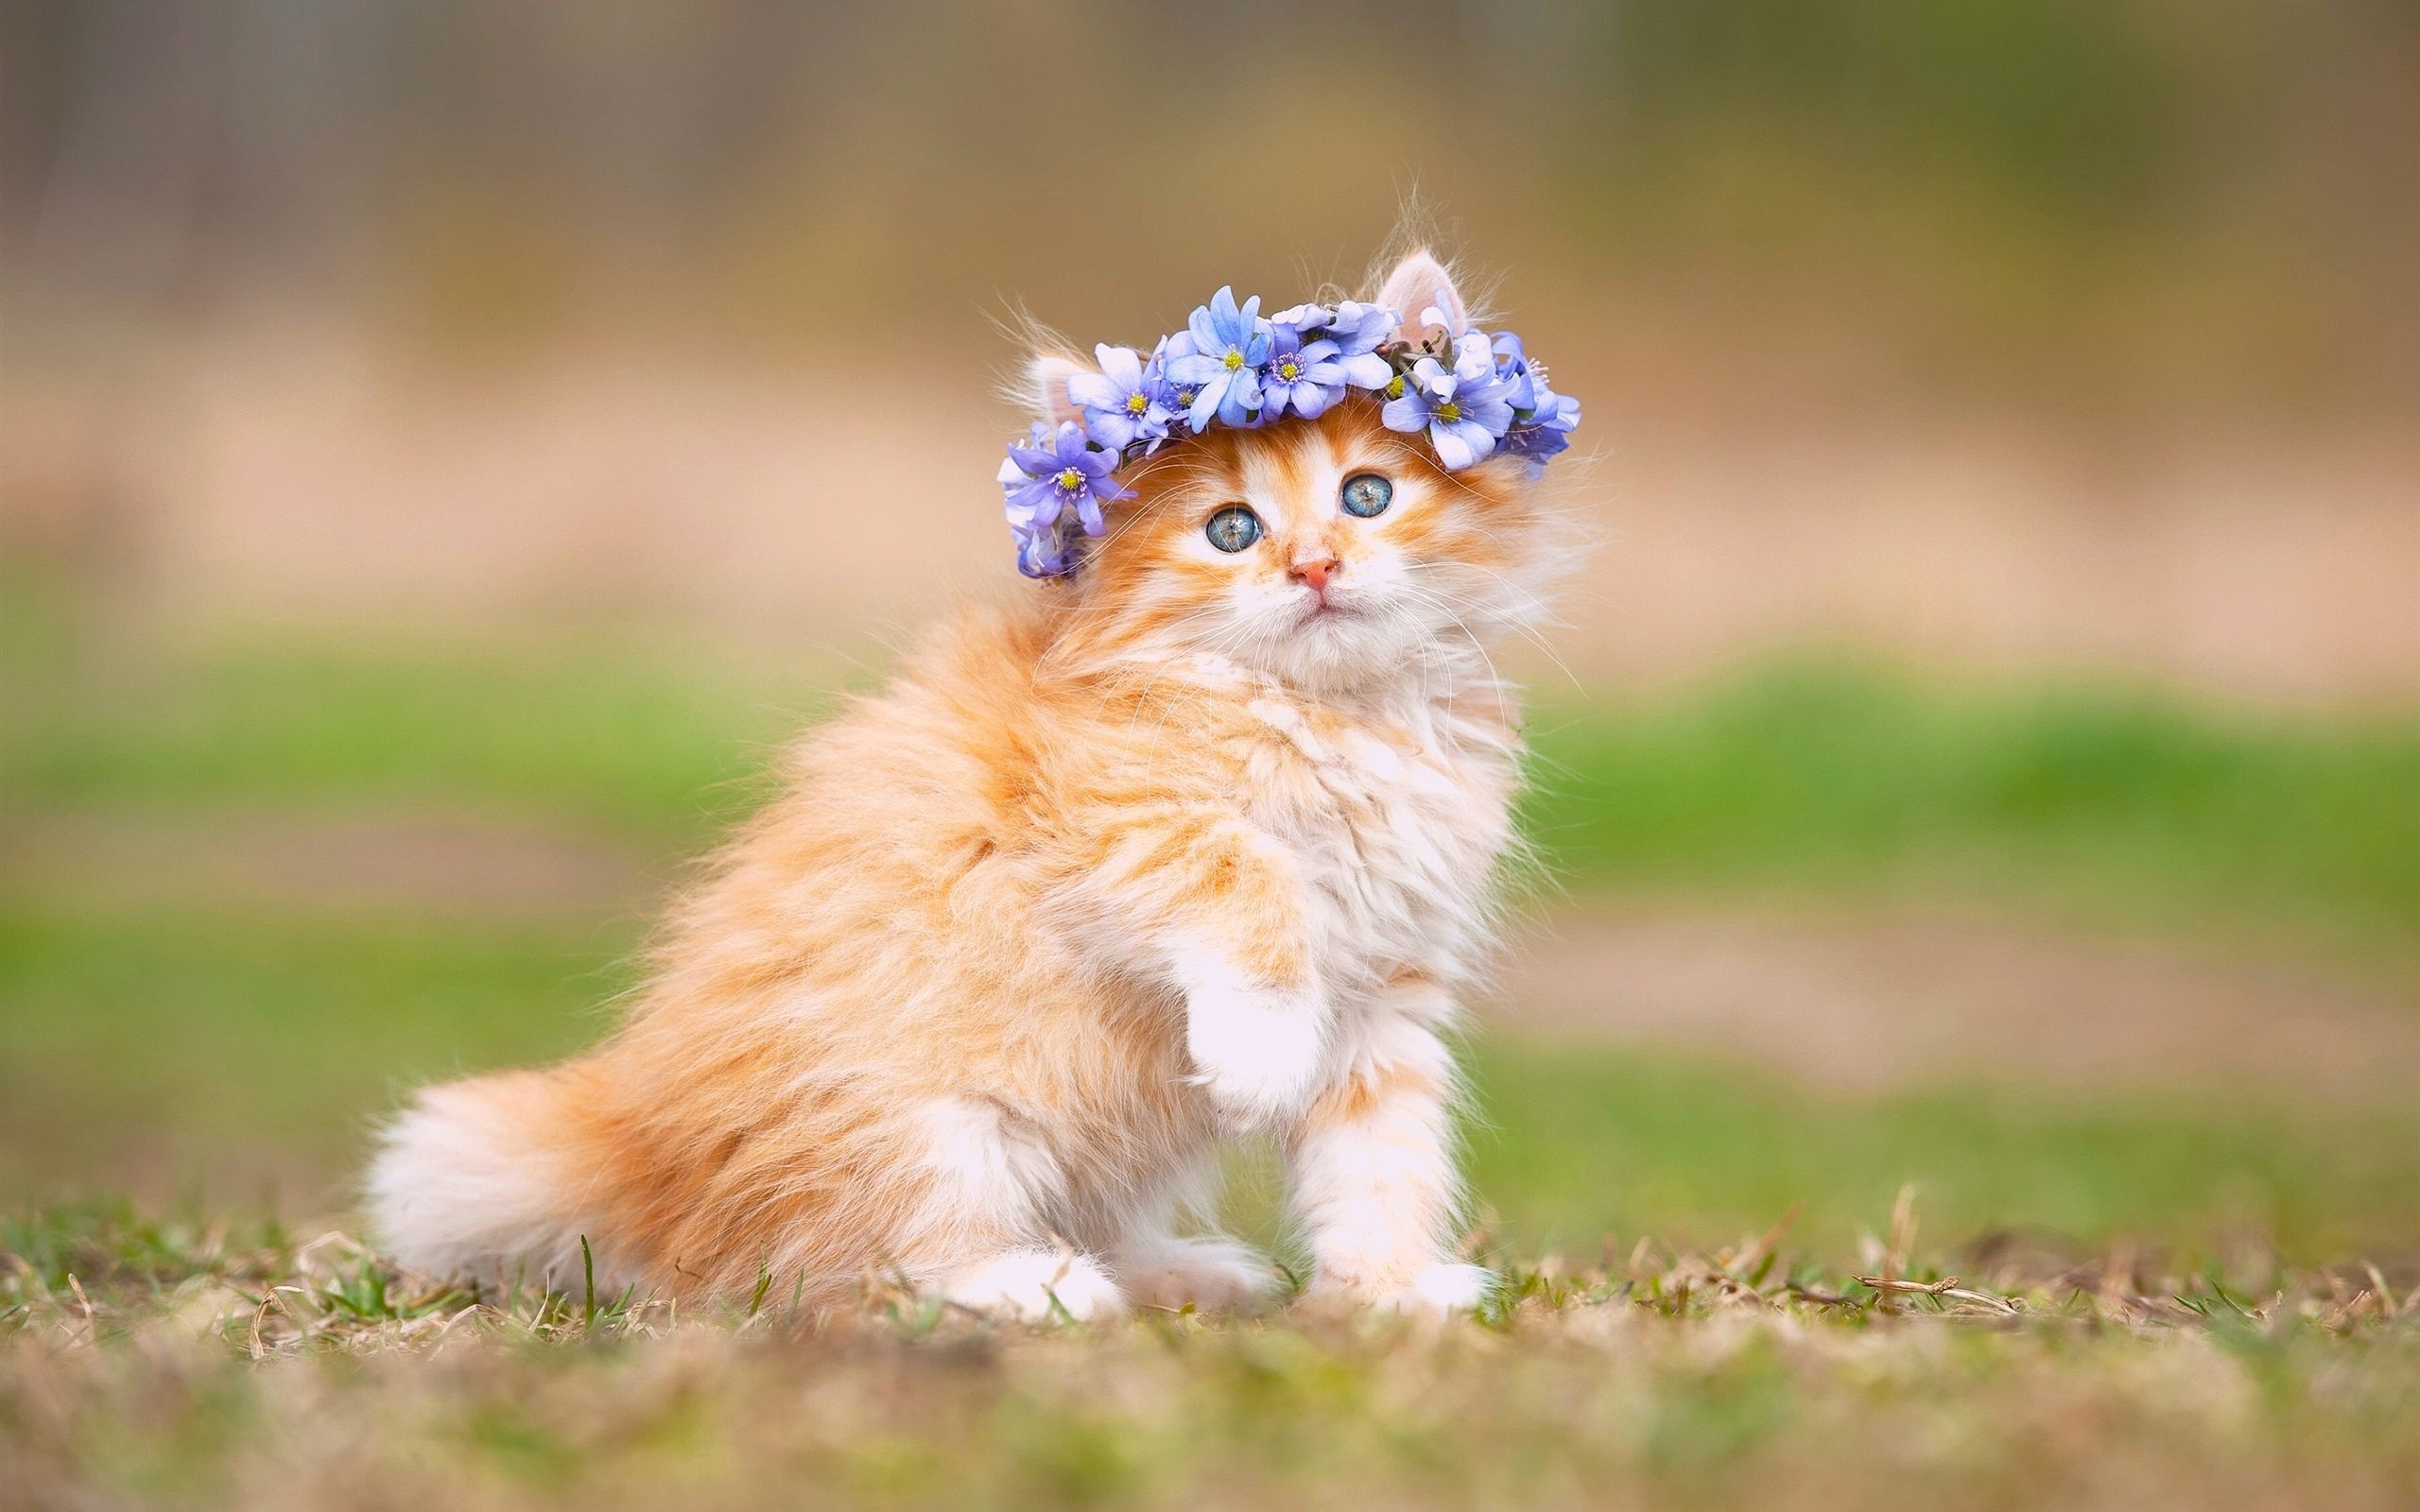 2560x1600 Hot Adorable Kitten Wallpaper Together With Magnificent Kitten Wallpapers